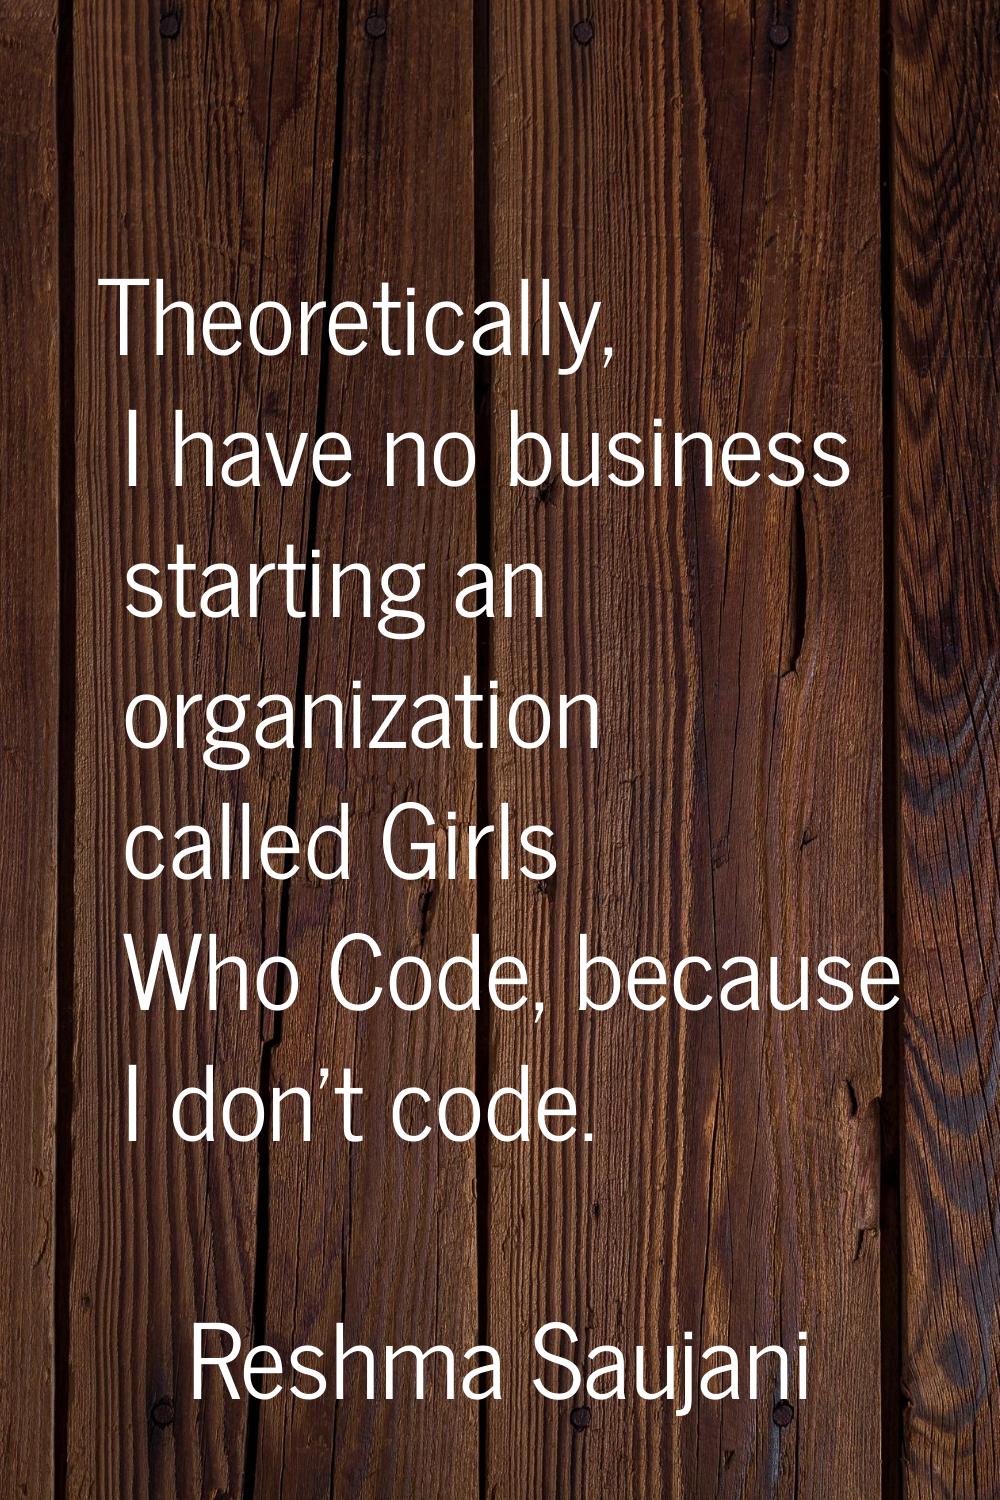 Theoretically, I have no business starting an organization called Girls Who Code, because I don't c